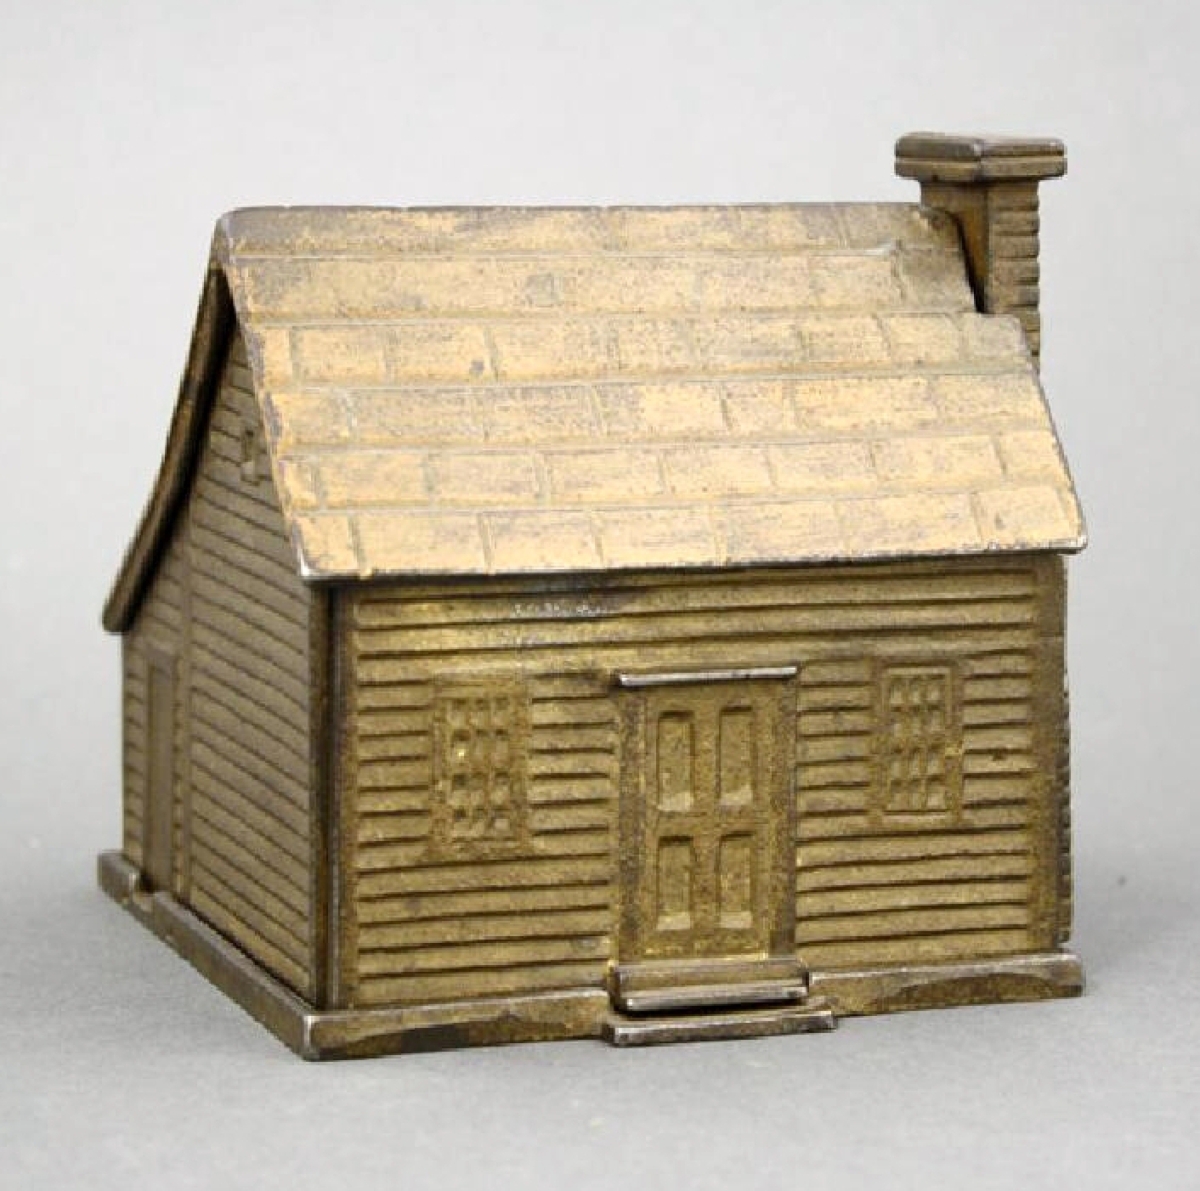 Only a handful of these colonial saltbox house banks exist, unknown maker, American, circa 1880s, and of cast iron. The bank is in pristine condition, provenance lists Donal Markey. The high estimate was $9,500, and the bank sold for $11,400.